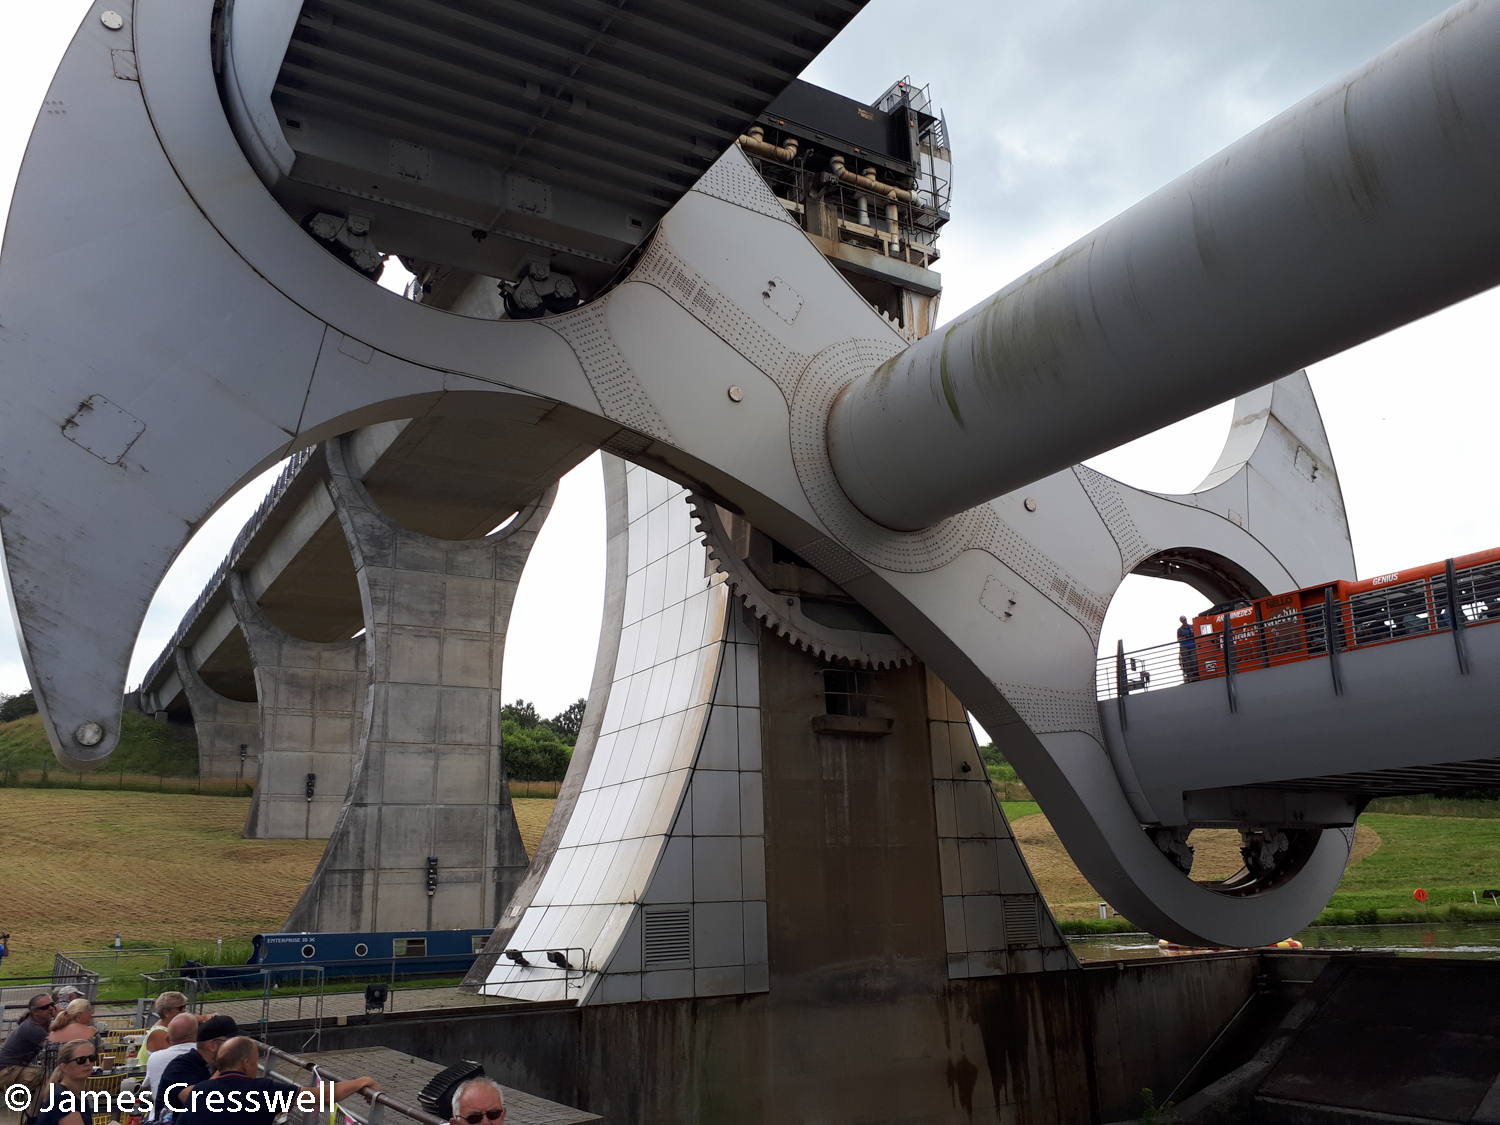 The Falkirk Wheel boat lift - lifts boats from one canal level to another